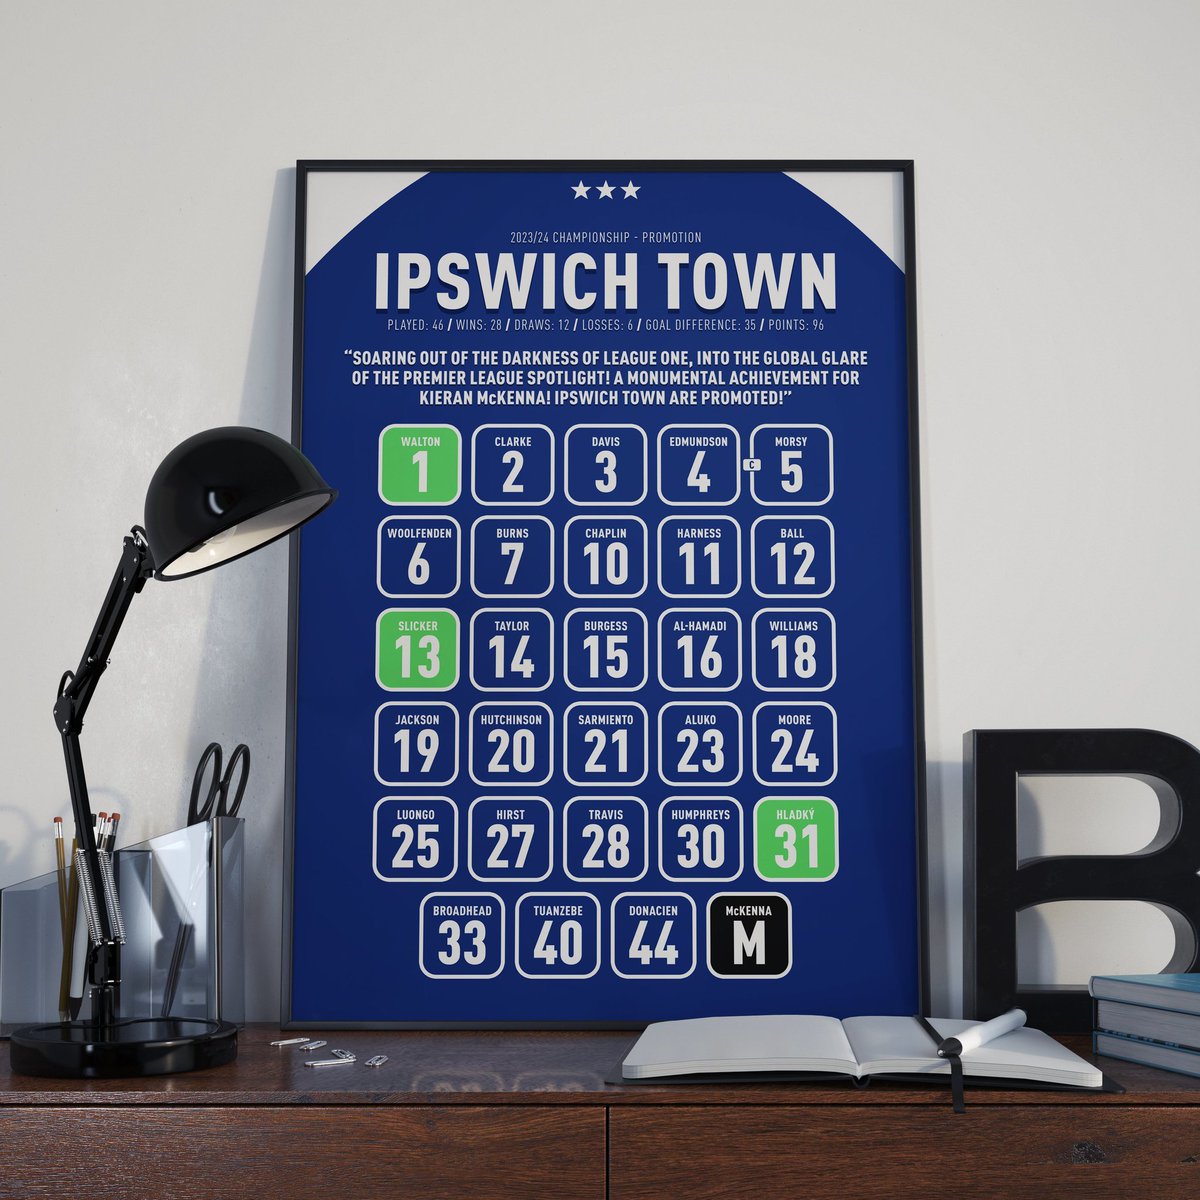 🎉 #ITFC PROMOTION PRINT GIVEAWAY!! 🗣️ Courtesy of @PixelPrintDZN we have this Ipswich Town 23/24 squad print to give away! To enter: ➡️ Follow us and @PixelPrintDZN 🔄 Repost and like this post 🤞 We'll announce the winner on Monday night - good luck!!